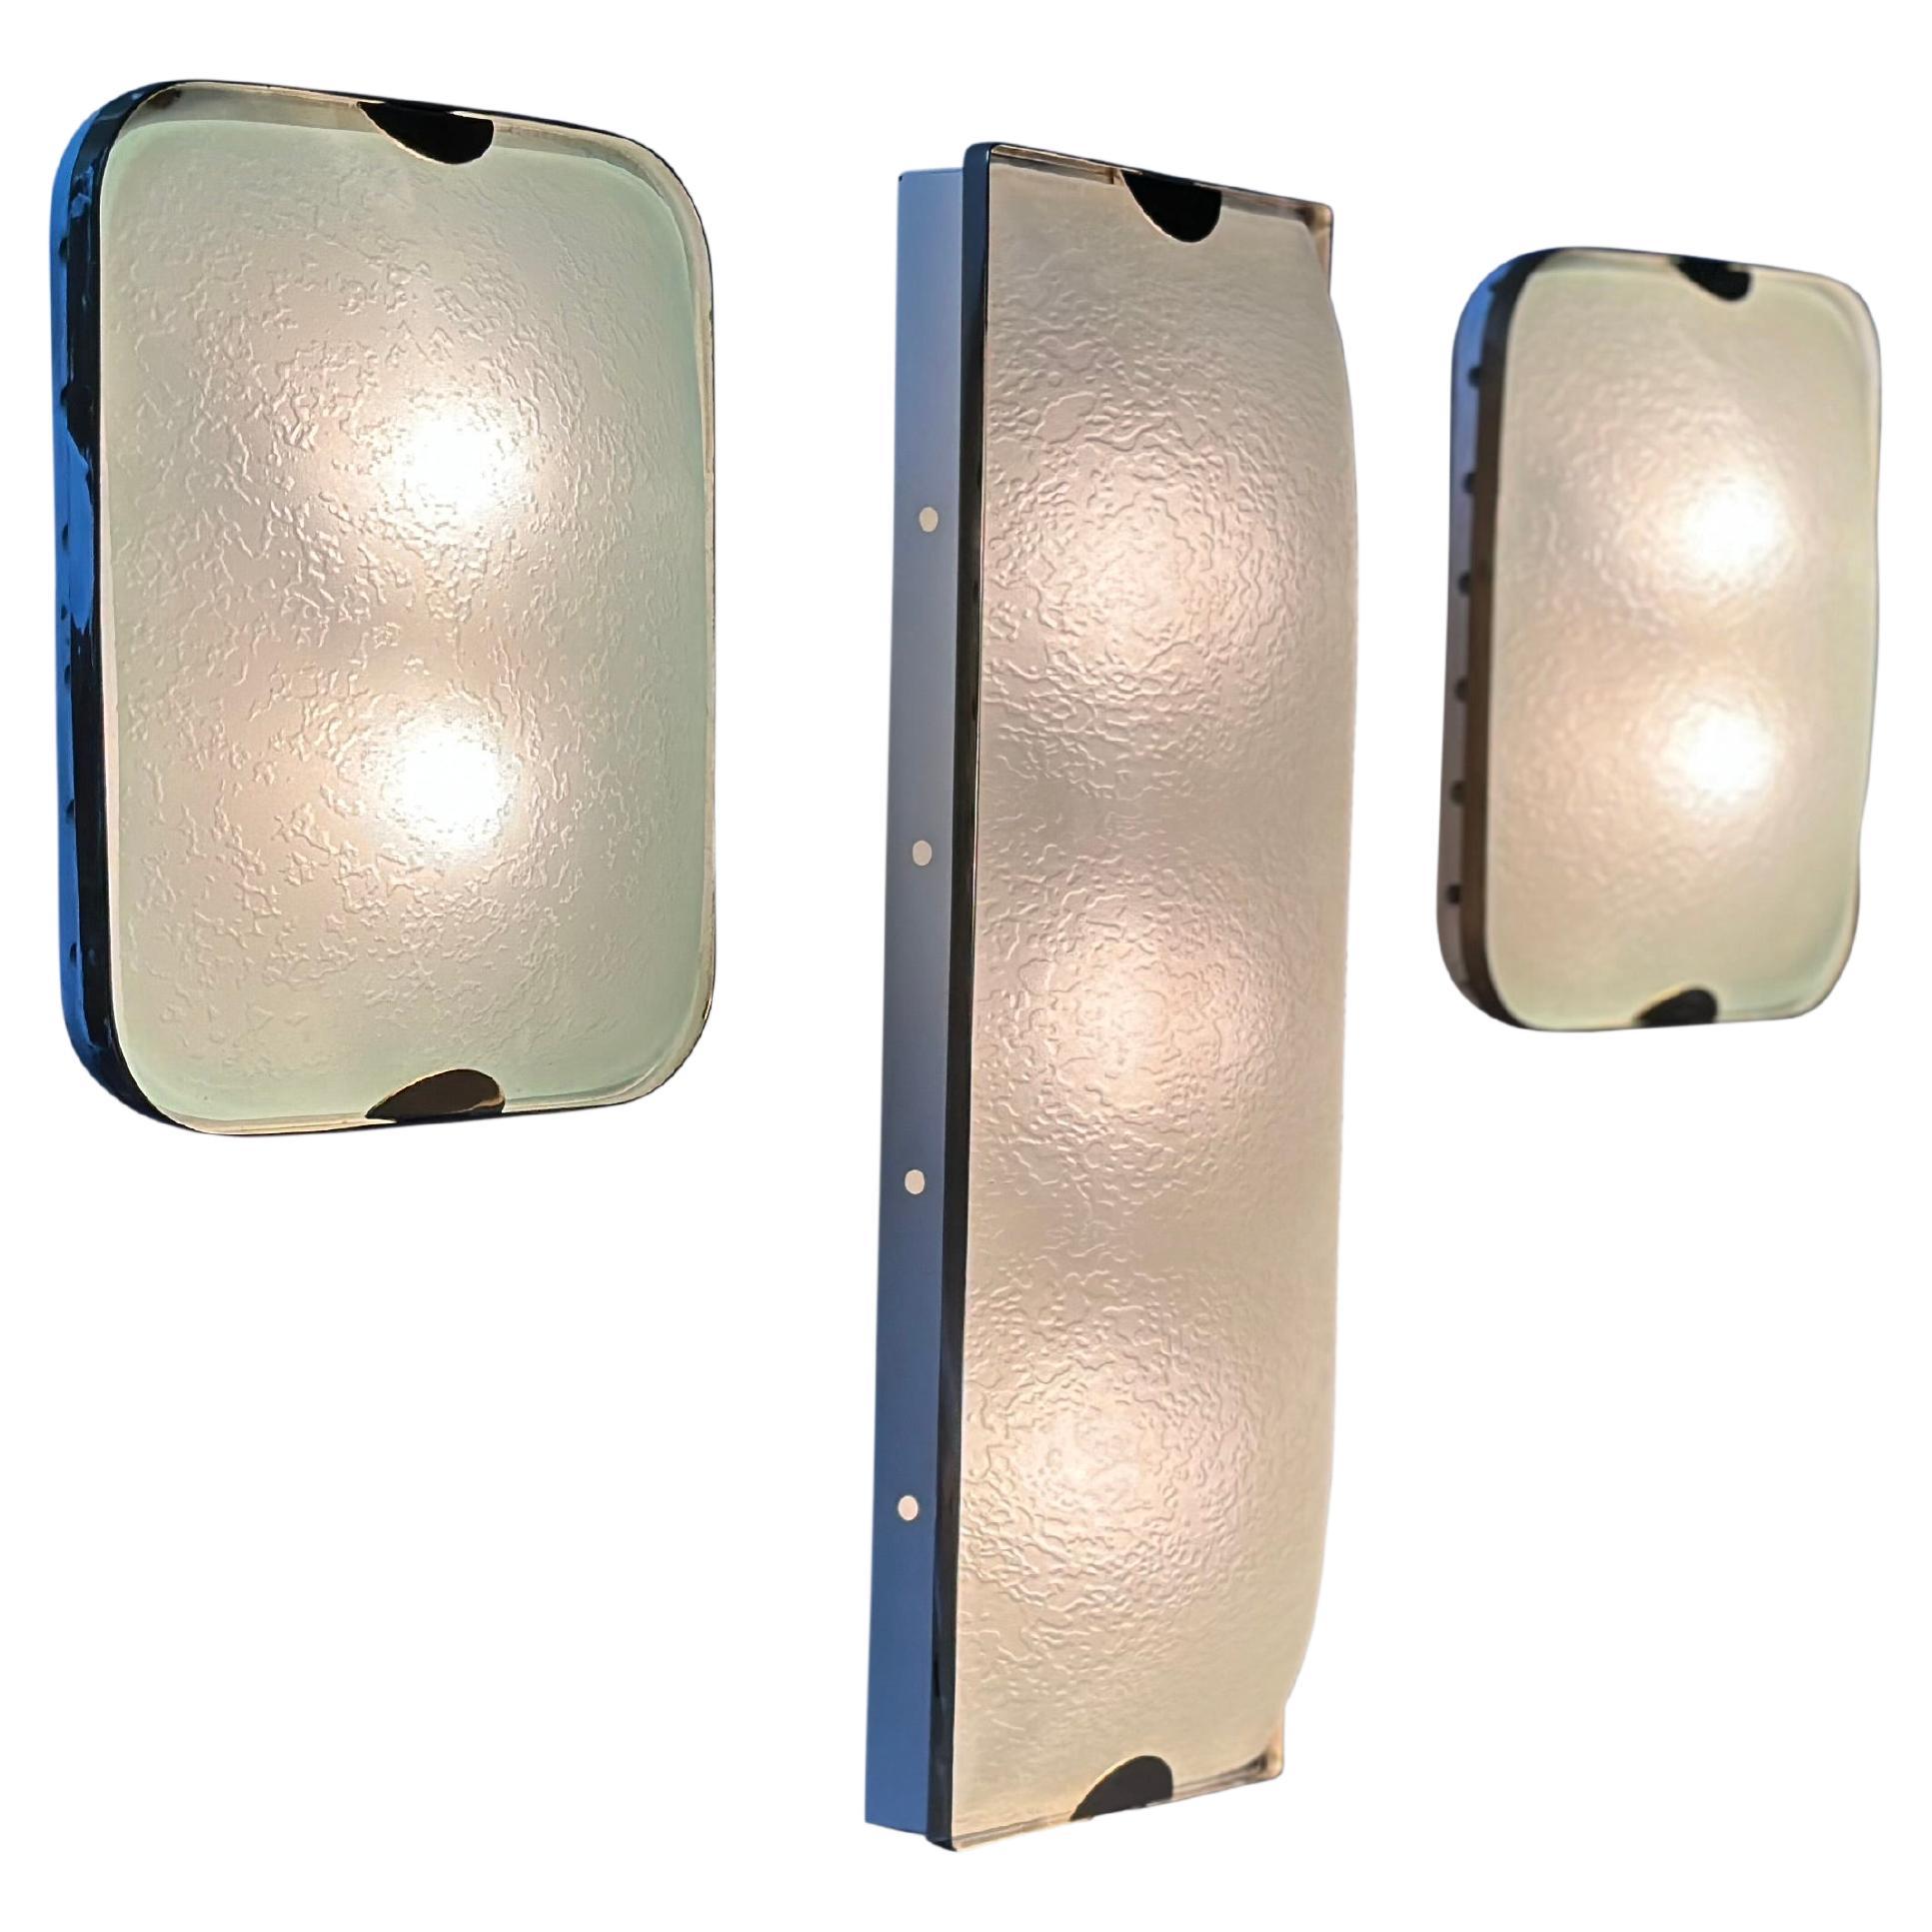 Fontana Arte flush mount ceiling or wall light.
This listing is for the long rectangular light.
Italy 1960s.
Textured glass, brass, metal.
Complimentary US rewiring. 
Takes 3 candelabra bulbs.

